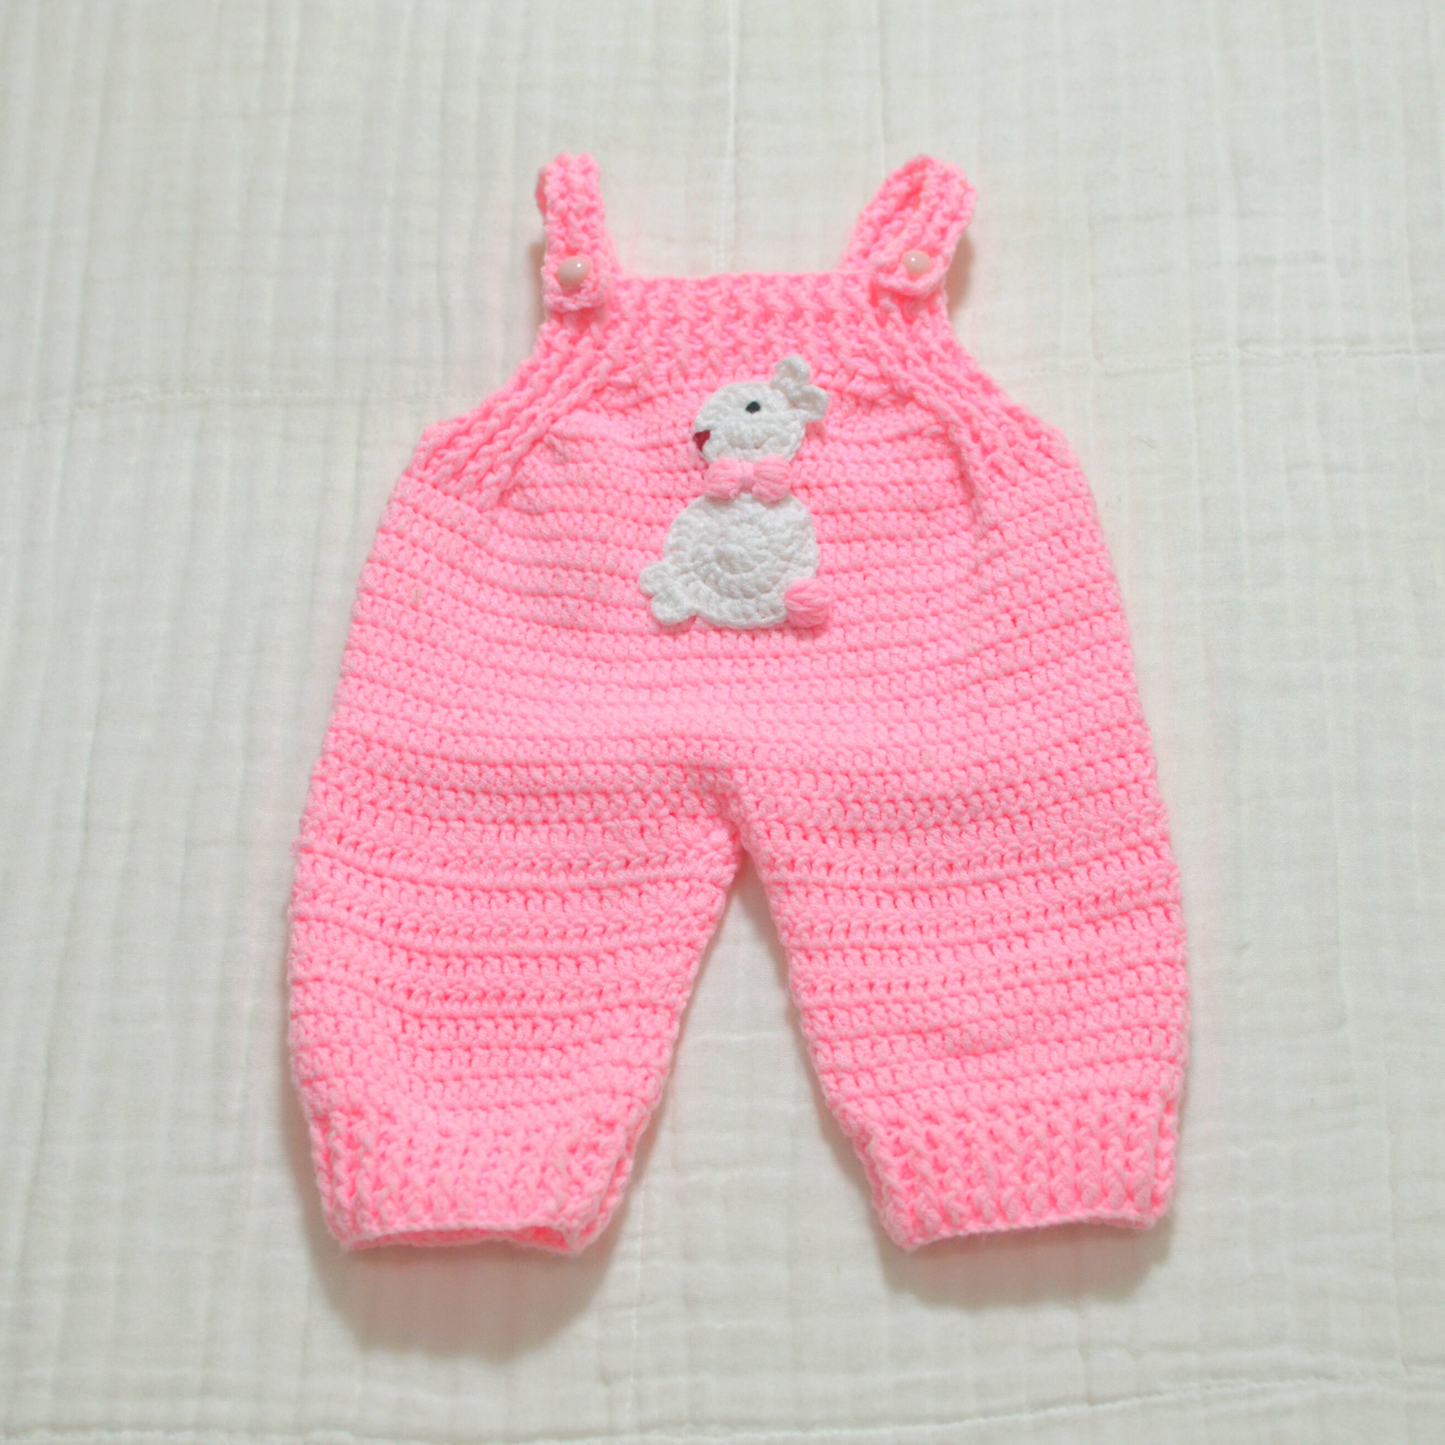 Knitted / Crochet Baby Dungaree 0 - 3 months Pink